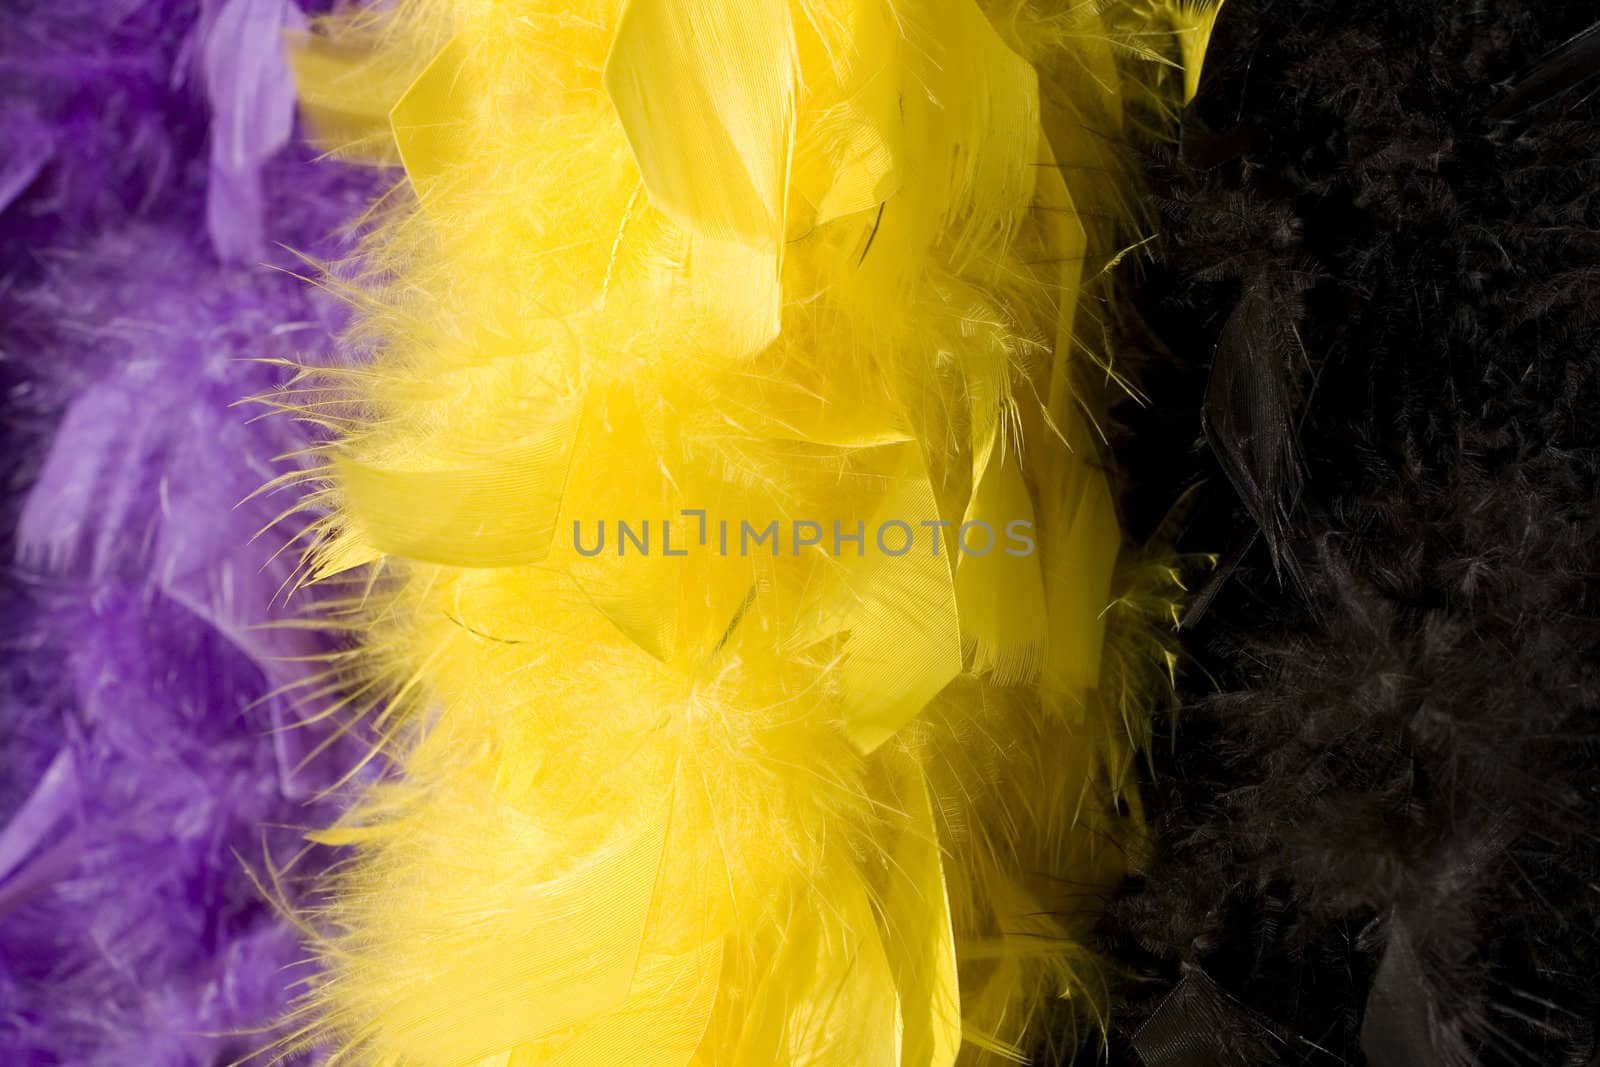 Plumage of duck yellow and black for wearing